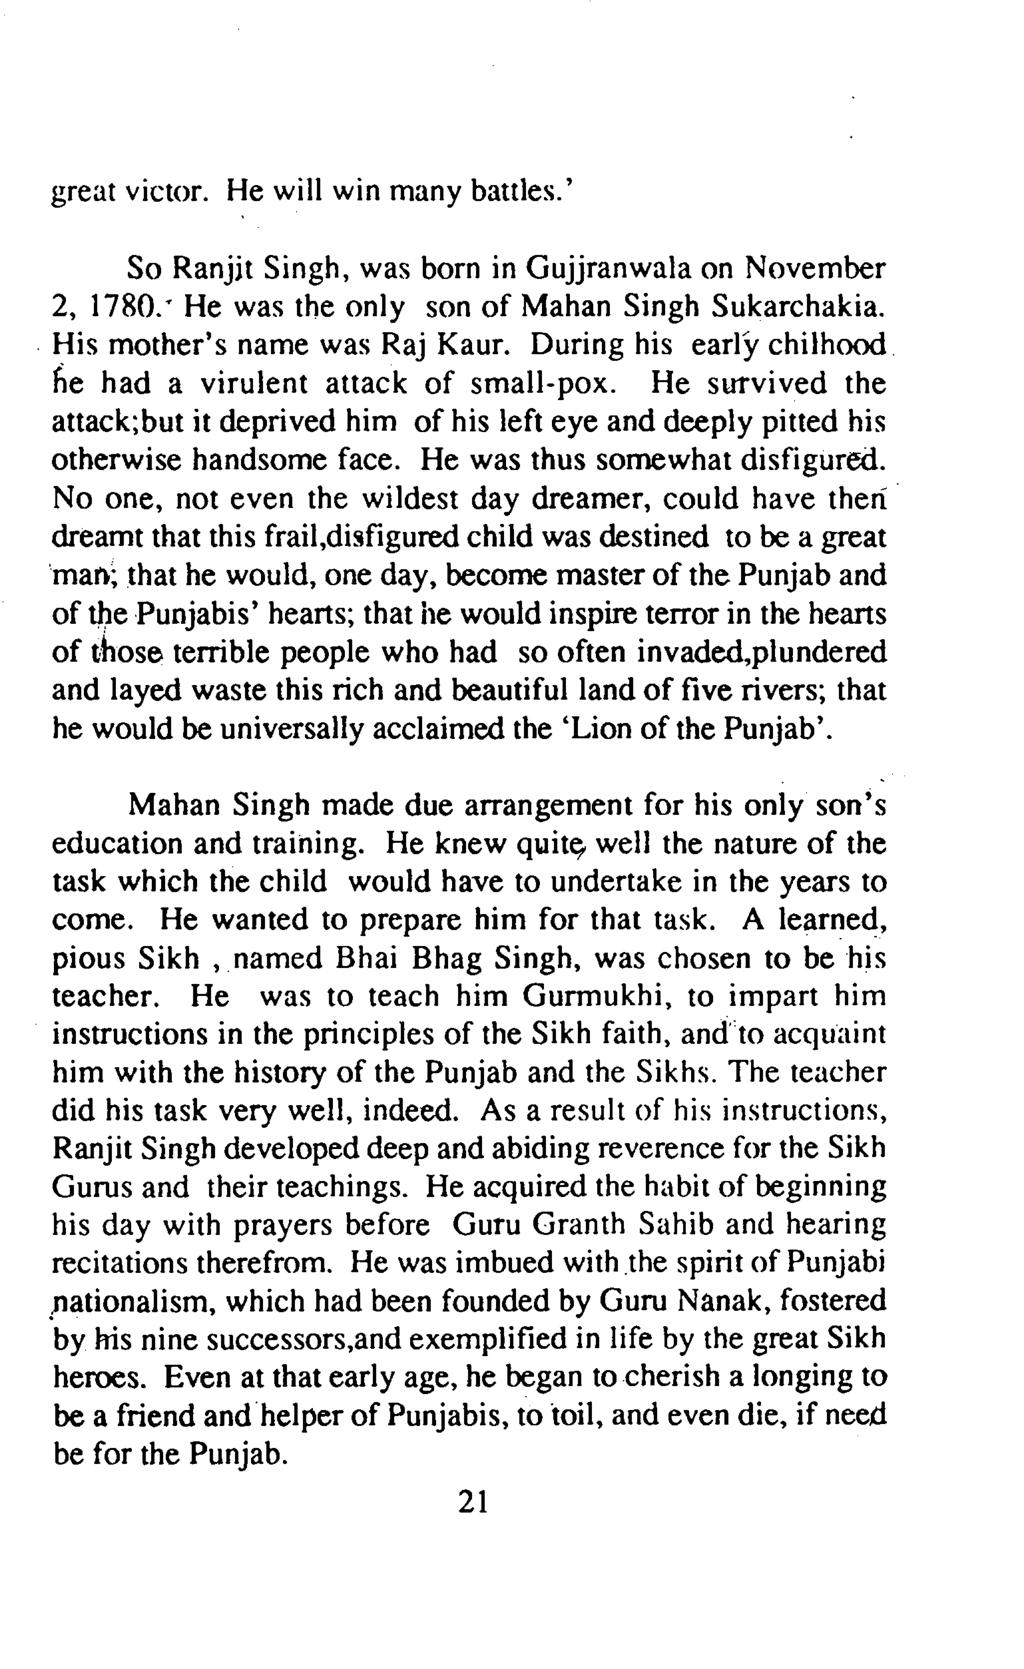 great victor. He will win many battles.' So Ranjit Singh, was born in Gujjranwala on November 2, 1780.' He was the only son of Mahan Singh Sukarchakia.. His mother's name was Raj Kaur.